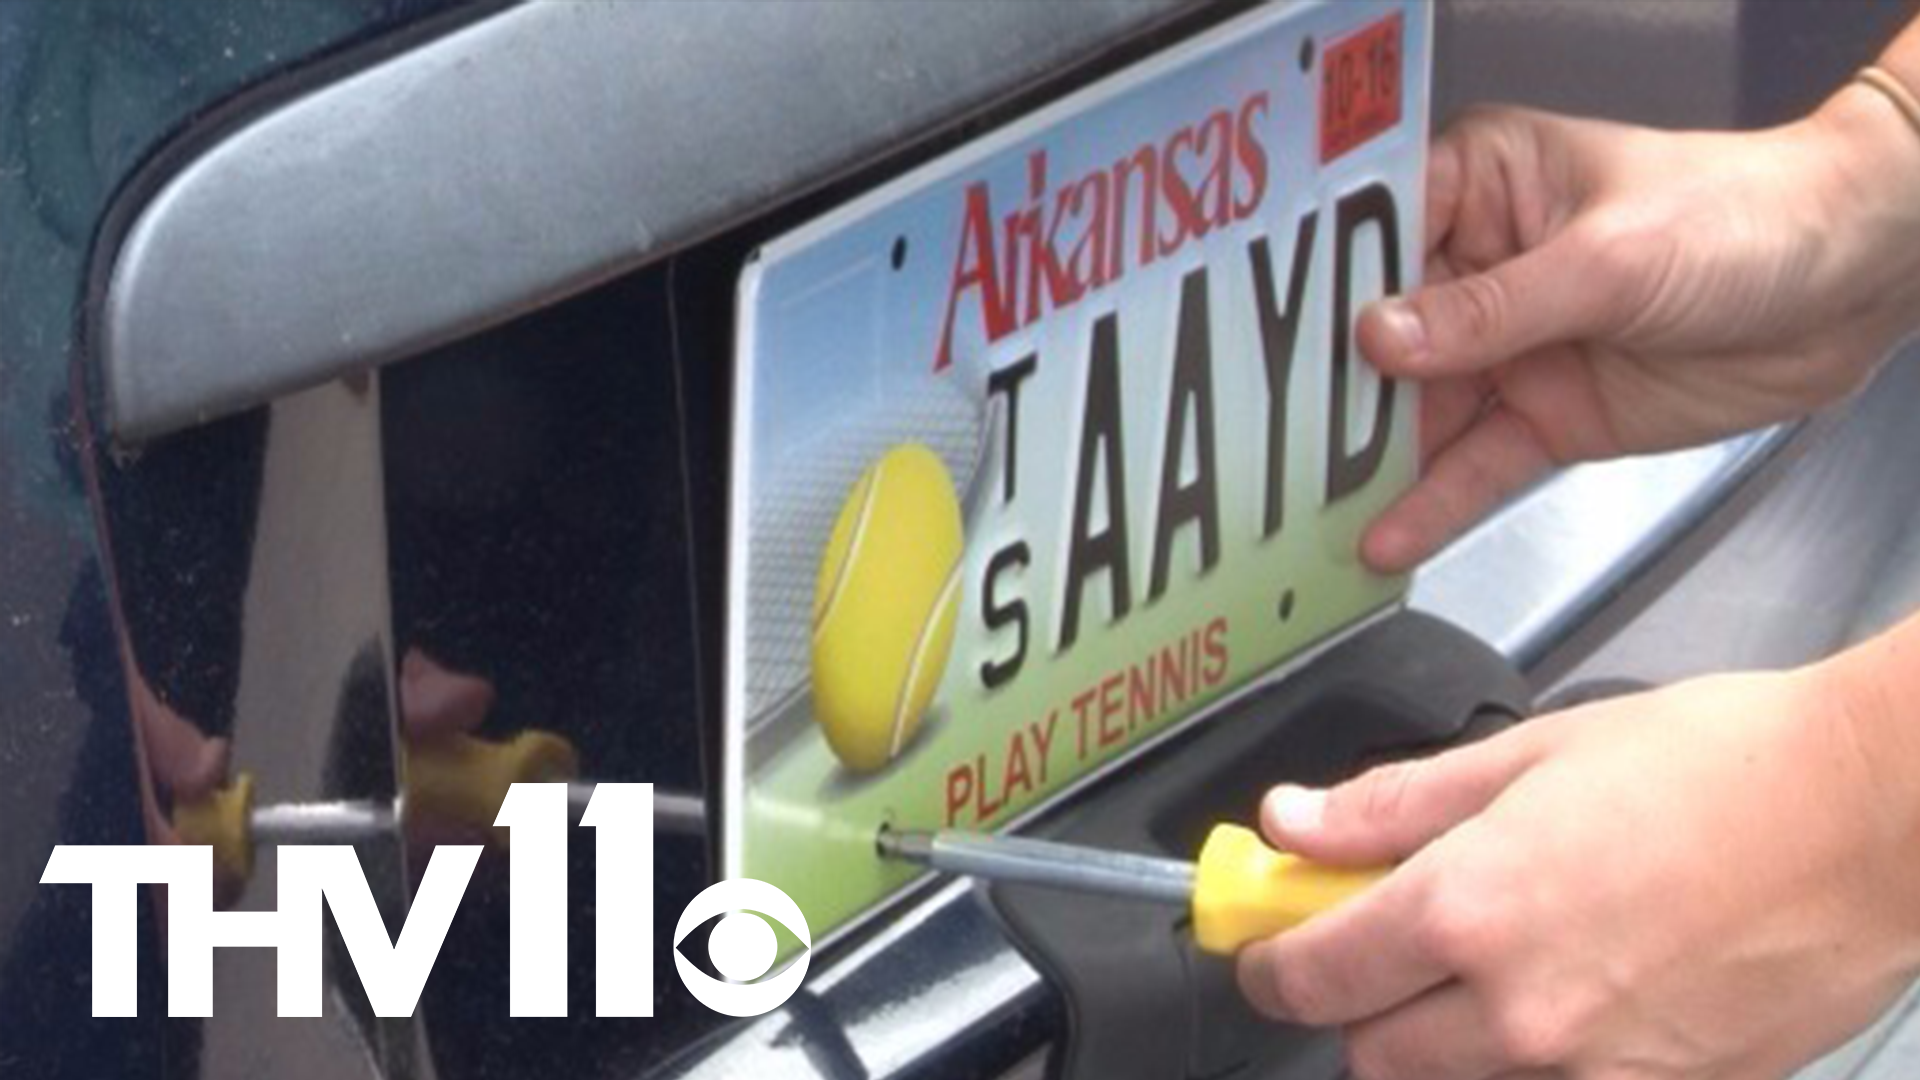 The new year will bring new license plates to Arkansas.